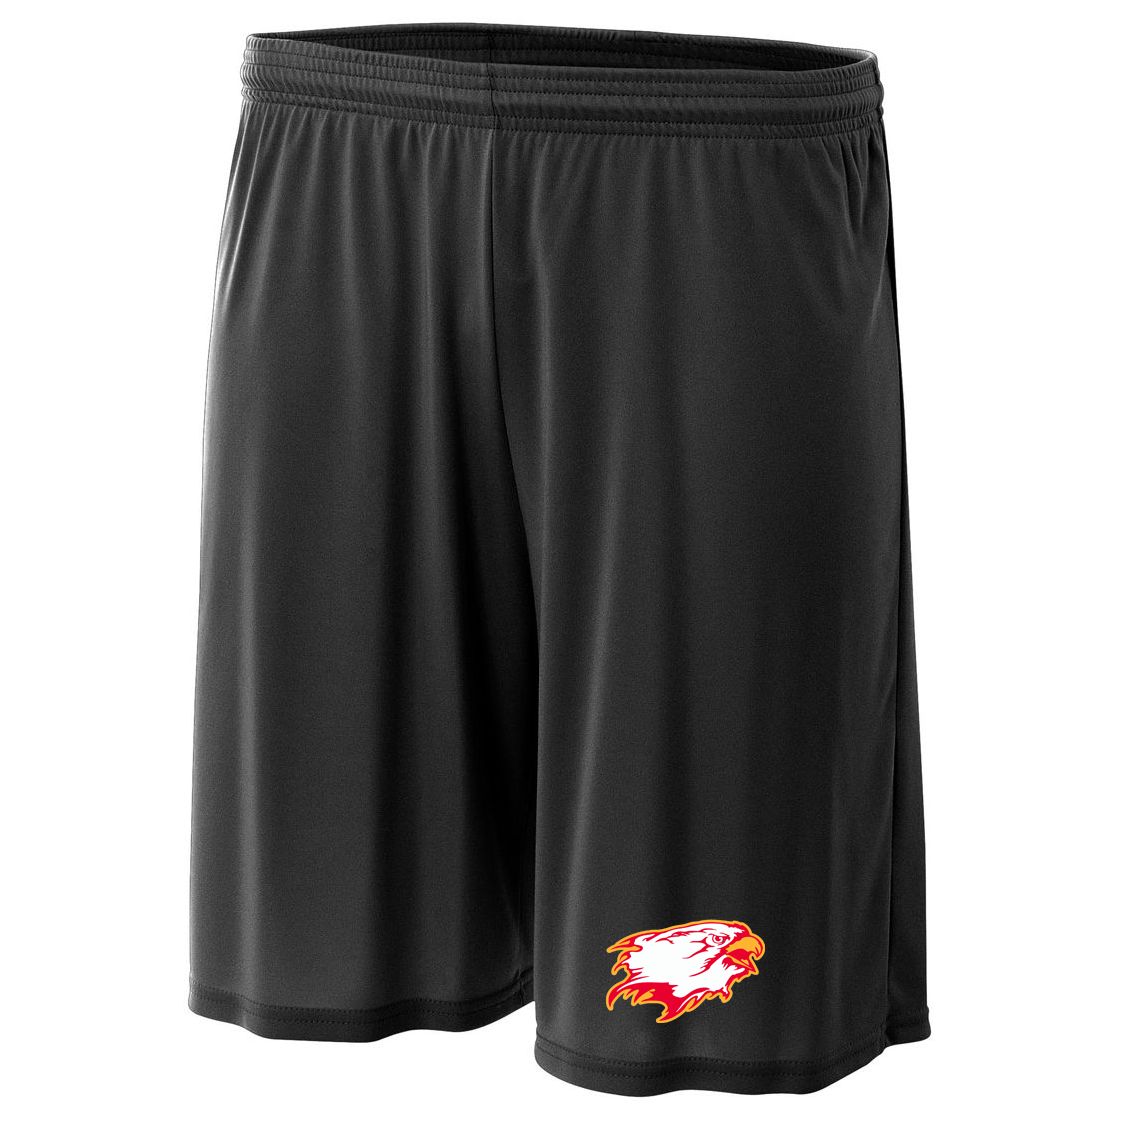 Falcons Lacrosse Club Cooling 7" Performance Shorts